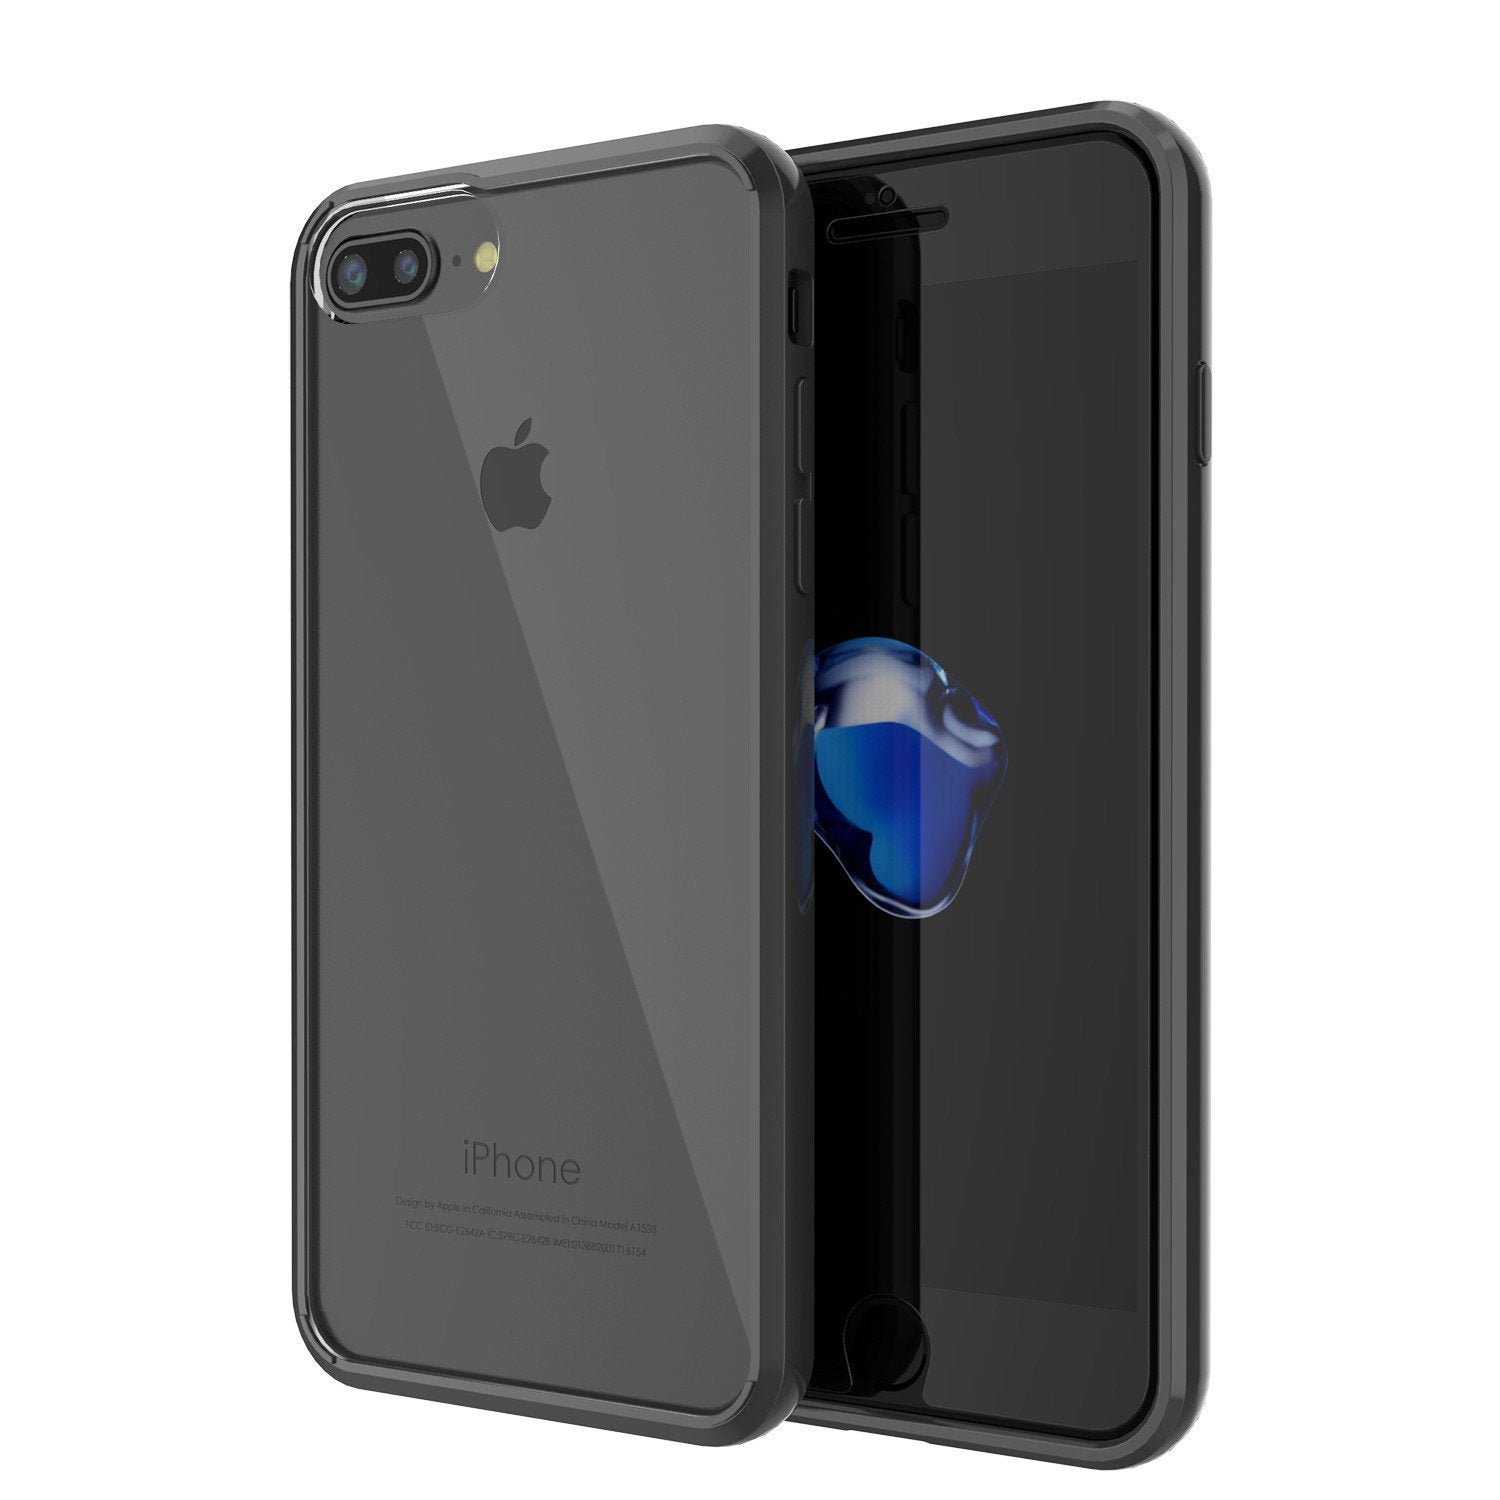 iPhone 7+ Plus Case Punkcase® LUCID 2.0 Black Series w/ PUNK SHIELD Screen Protector | Ultra Fit